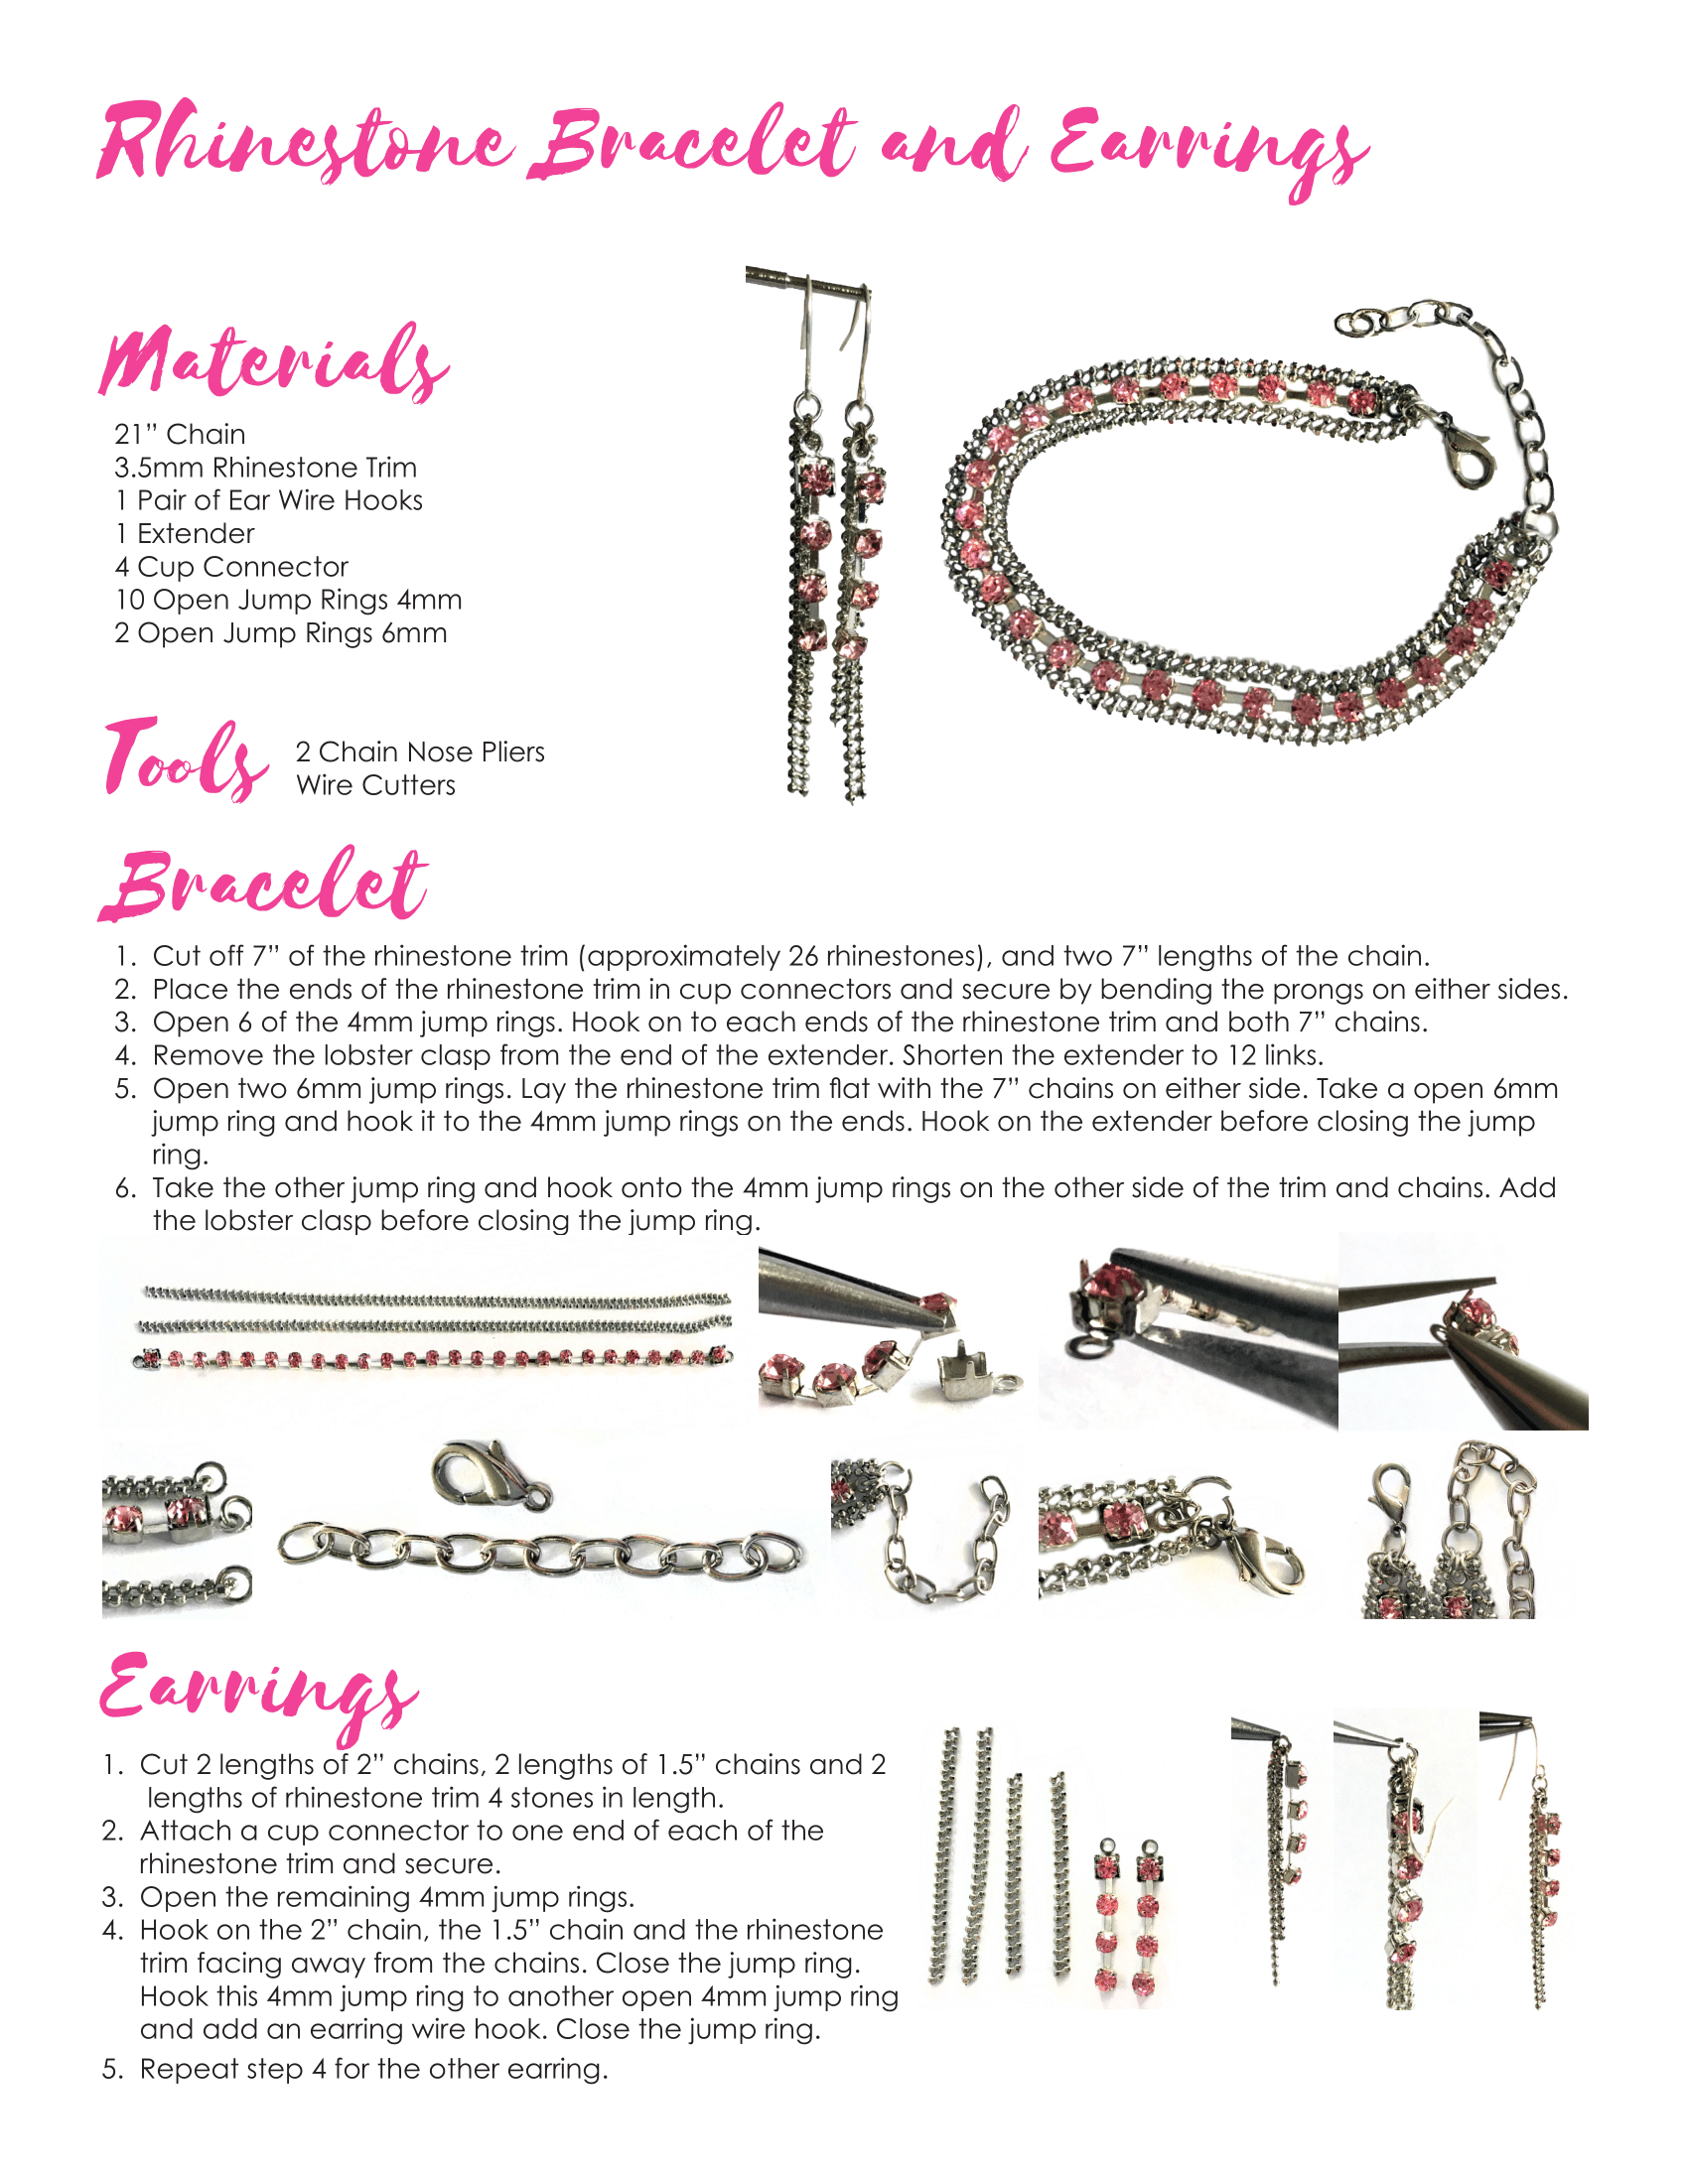 Materials & instructions to create your own rhinestone bracelet & earrings